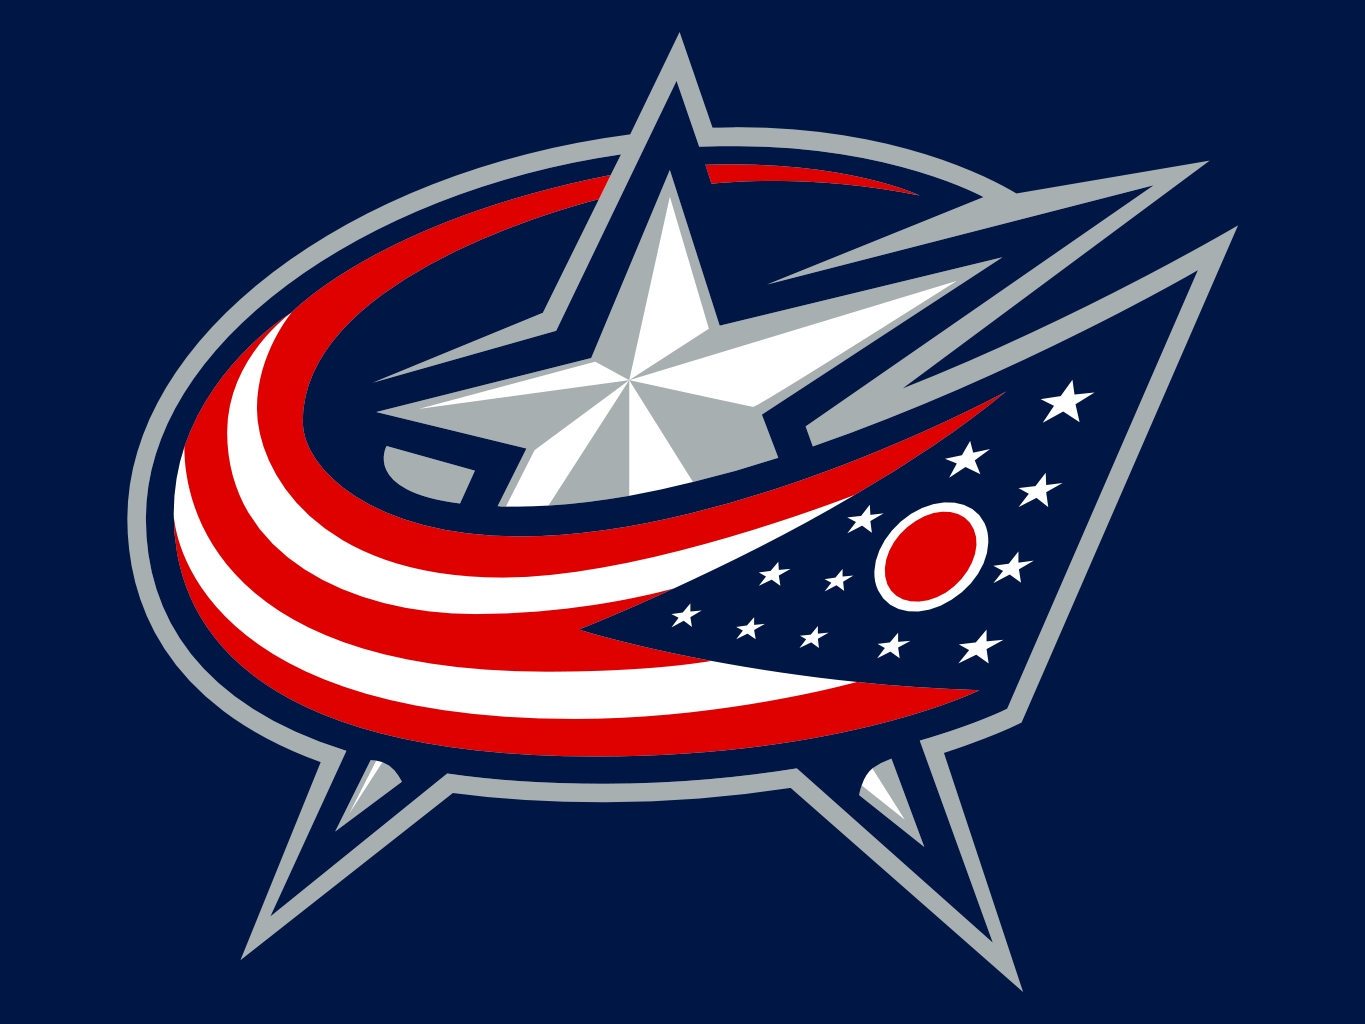 Buy Columbus Blue Jackets Tickets Today